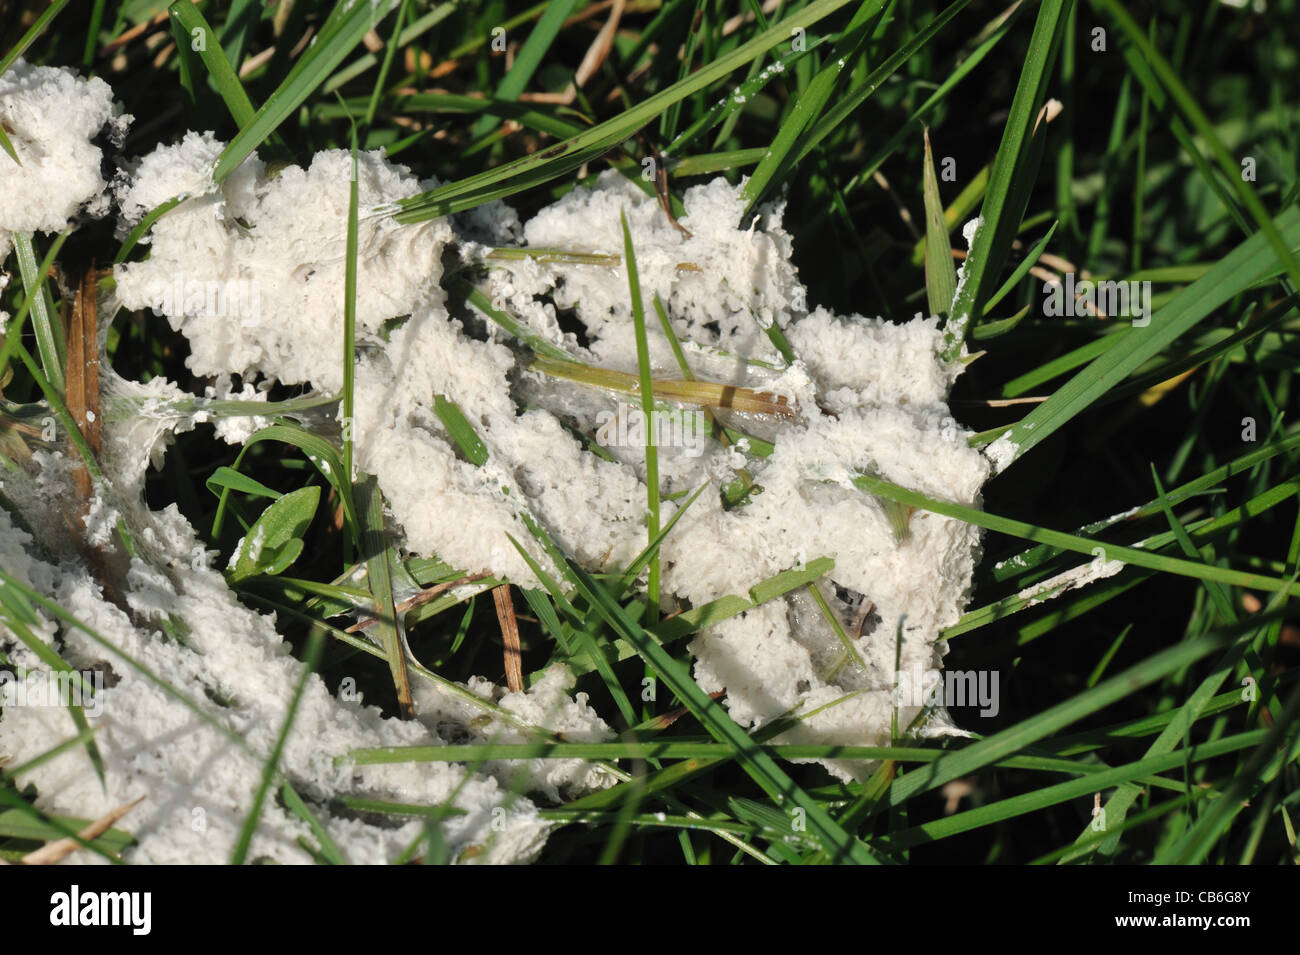 Freshly formed slime mould (Mucilago crustacea) on ryegrass pasture Stock Photo